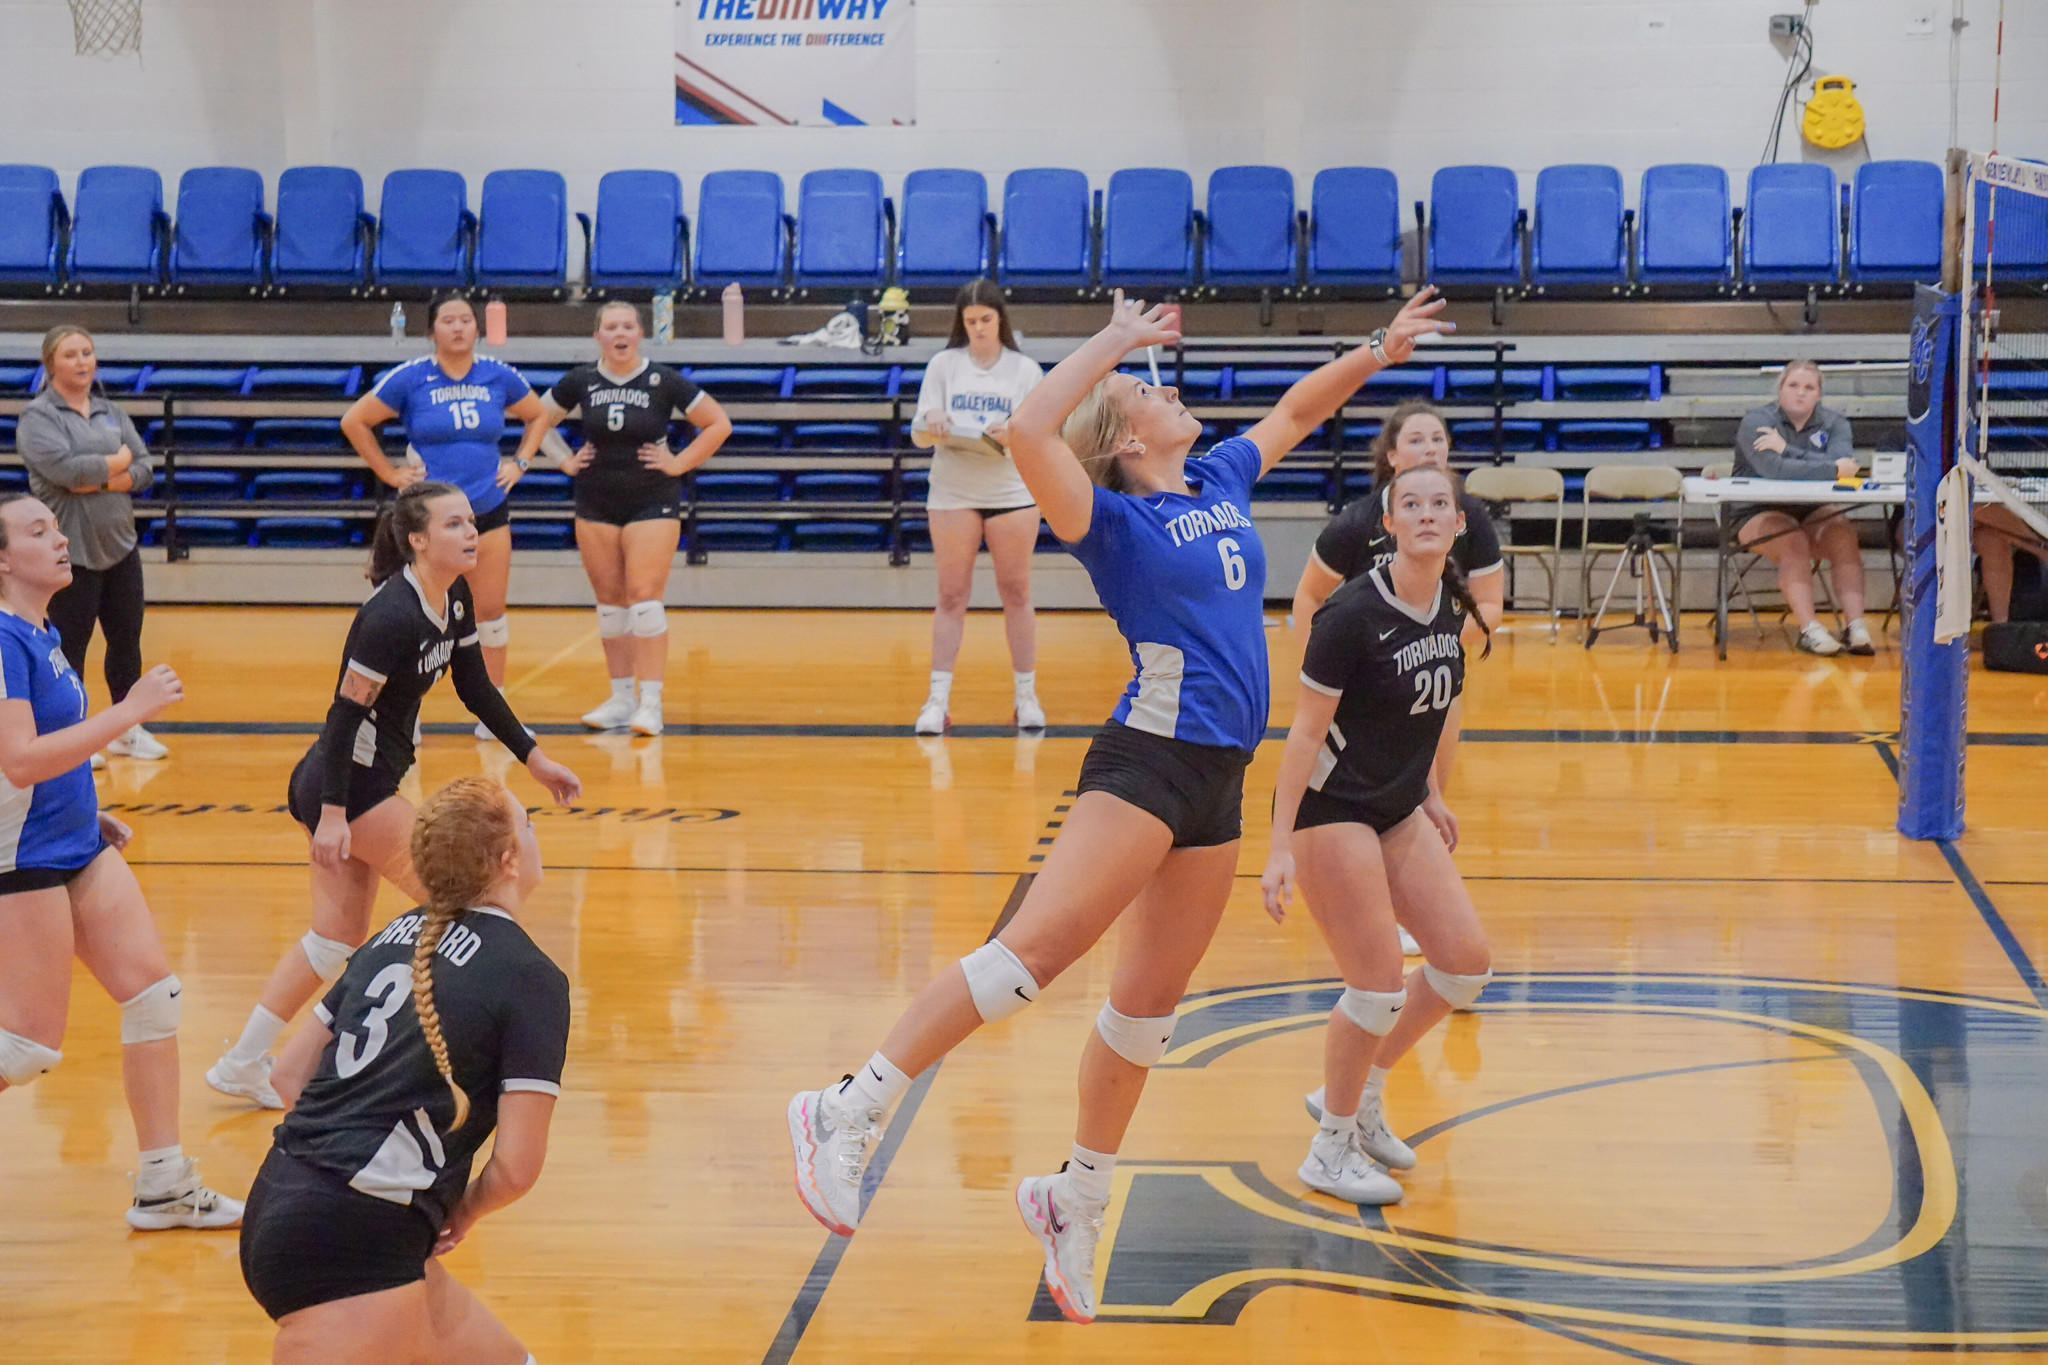 Tornados Fall Twice to Conclude Meredith College Tournament